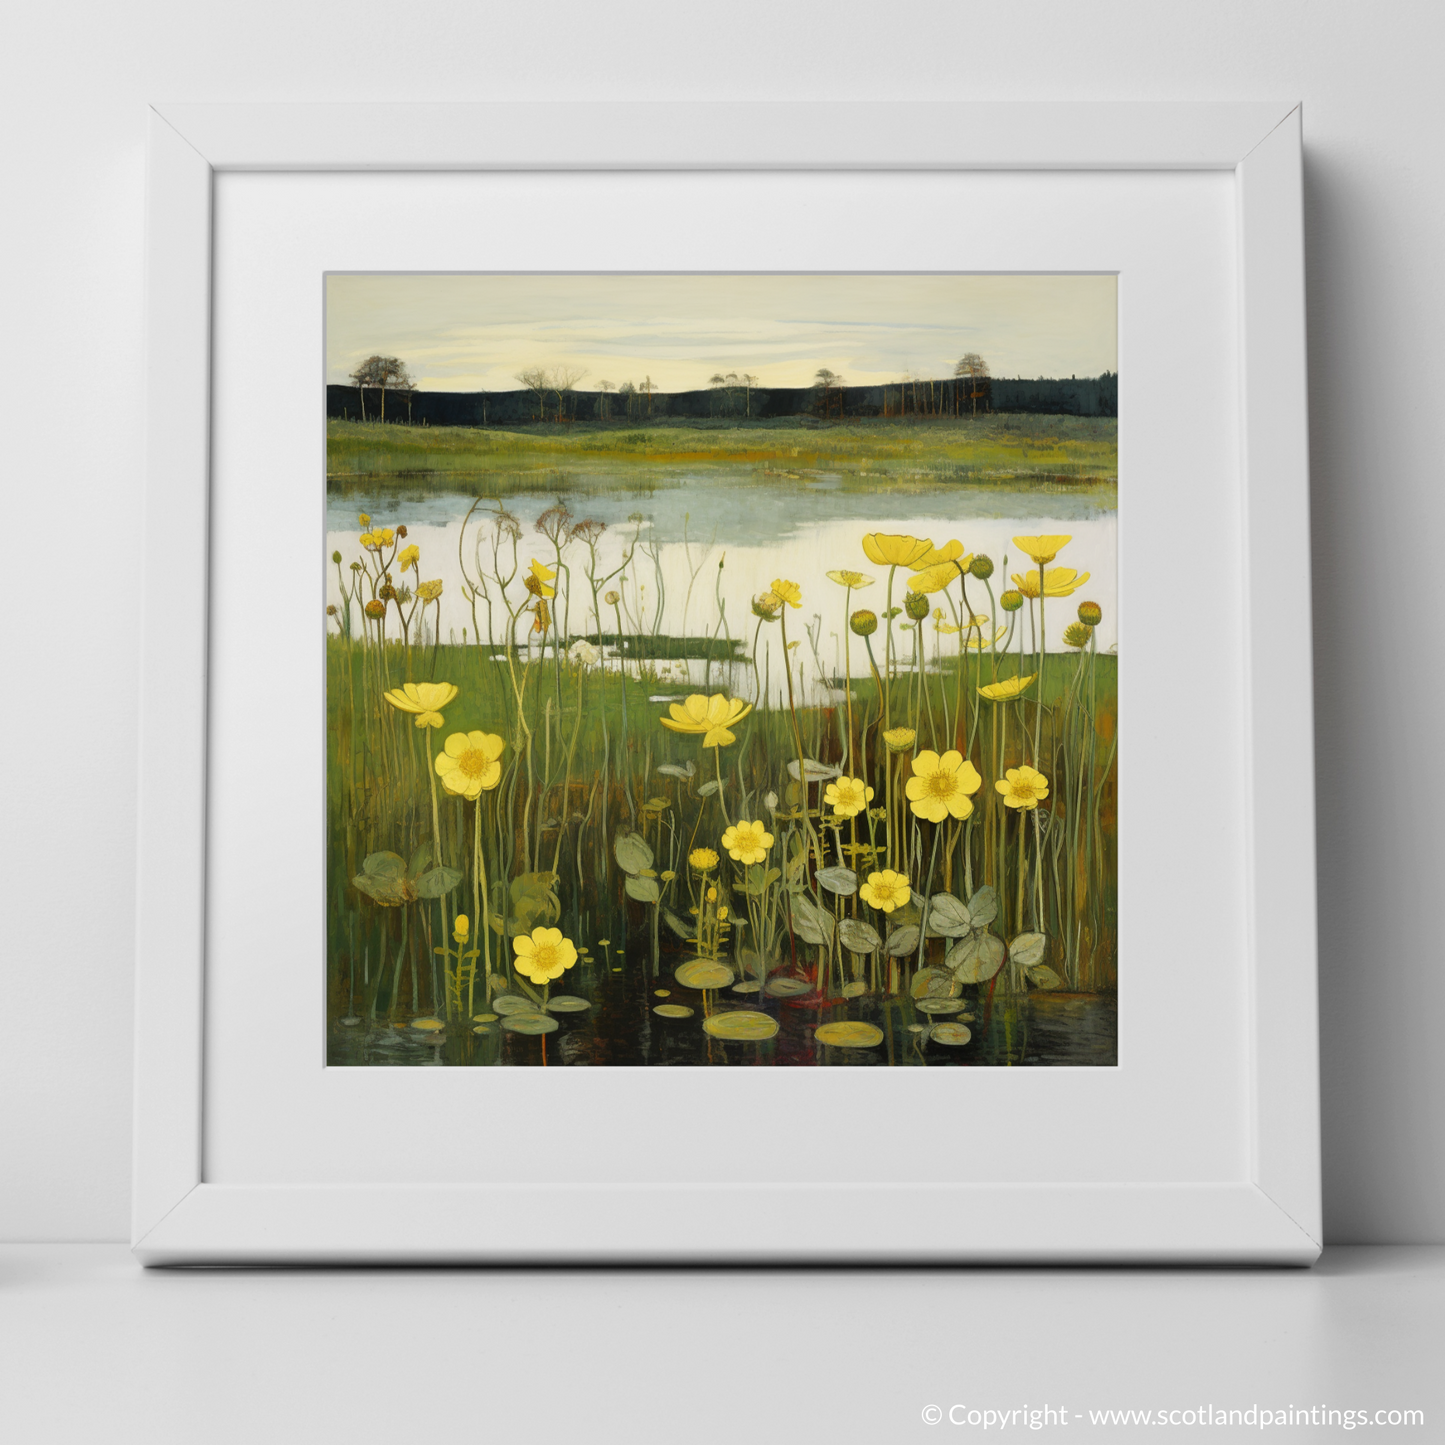 Scottish Wetlands Whimsy: A Naive Art Tribute to Caithness Flora